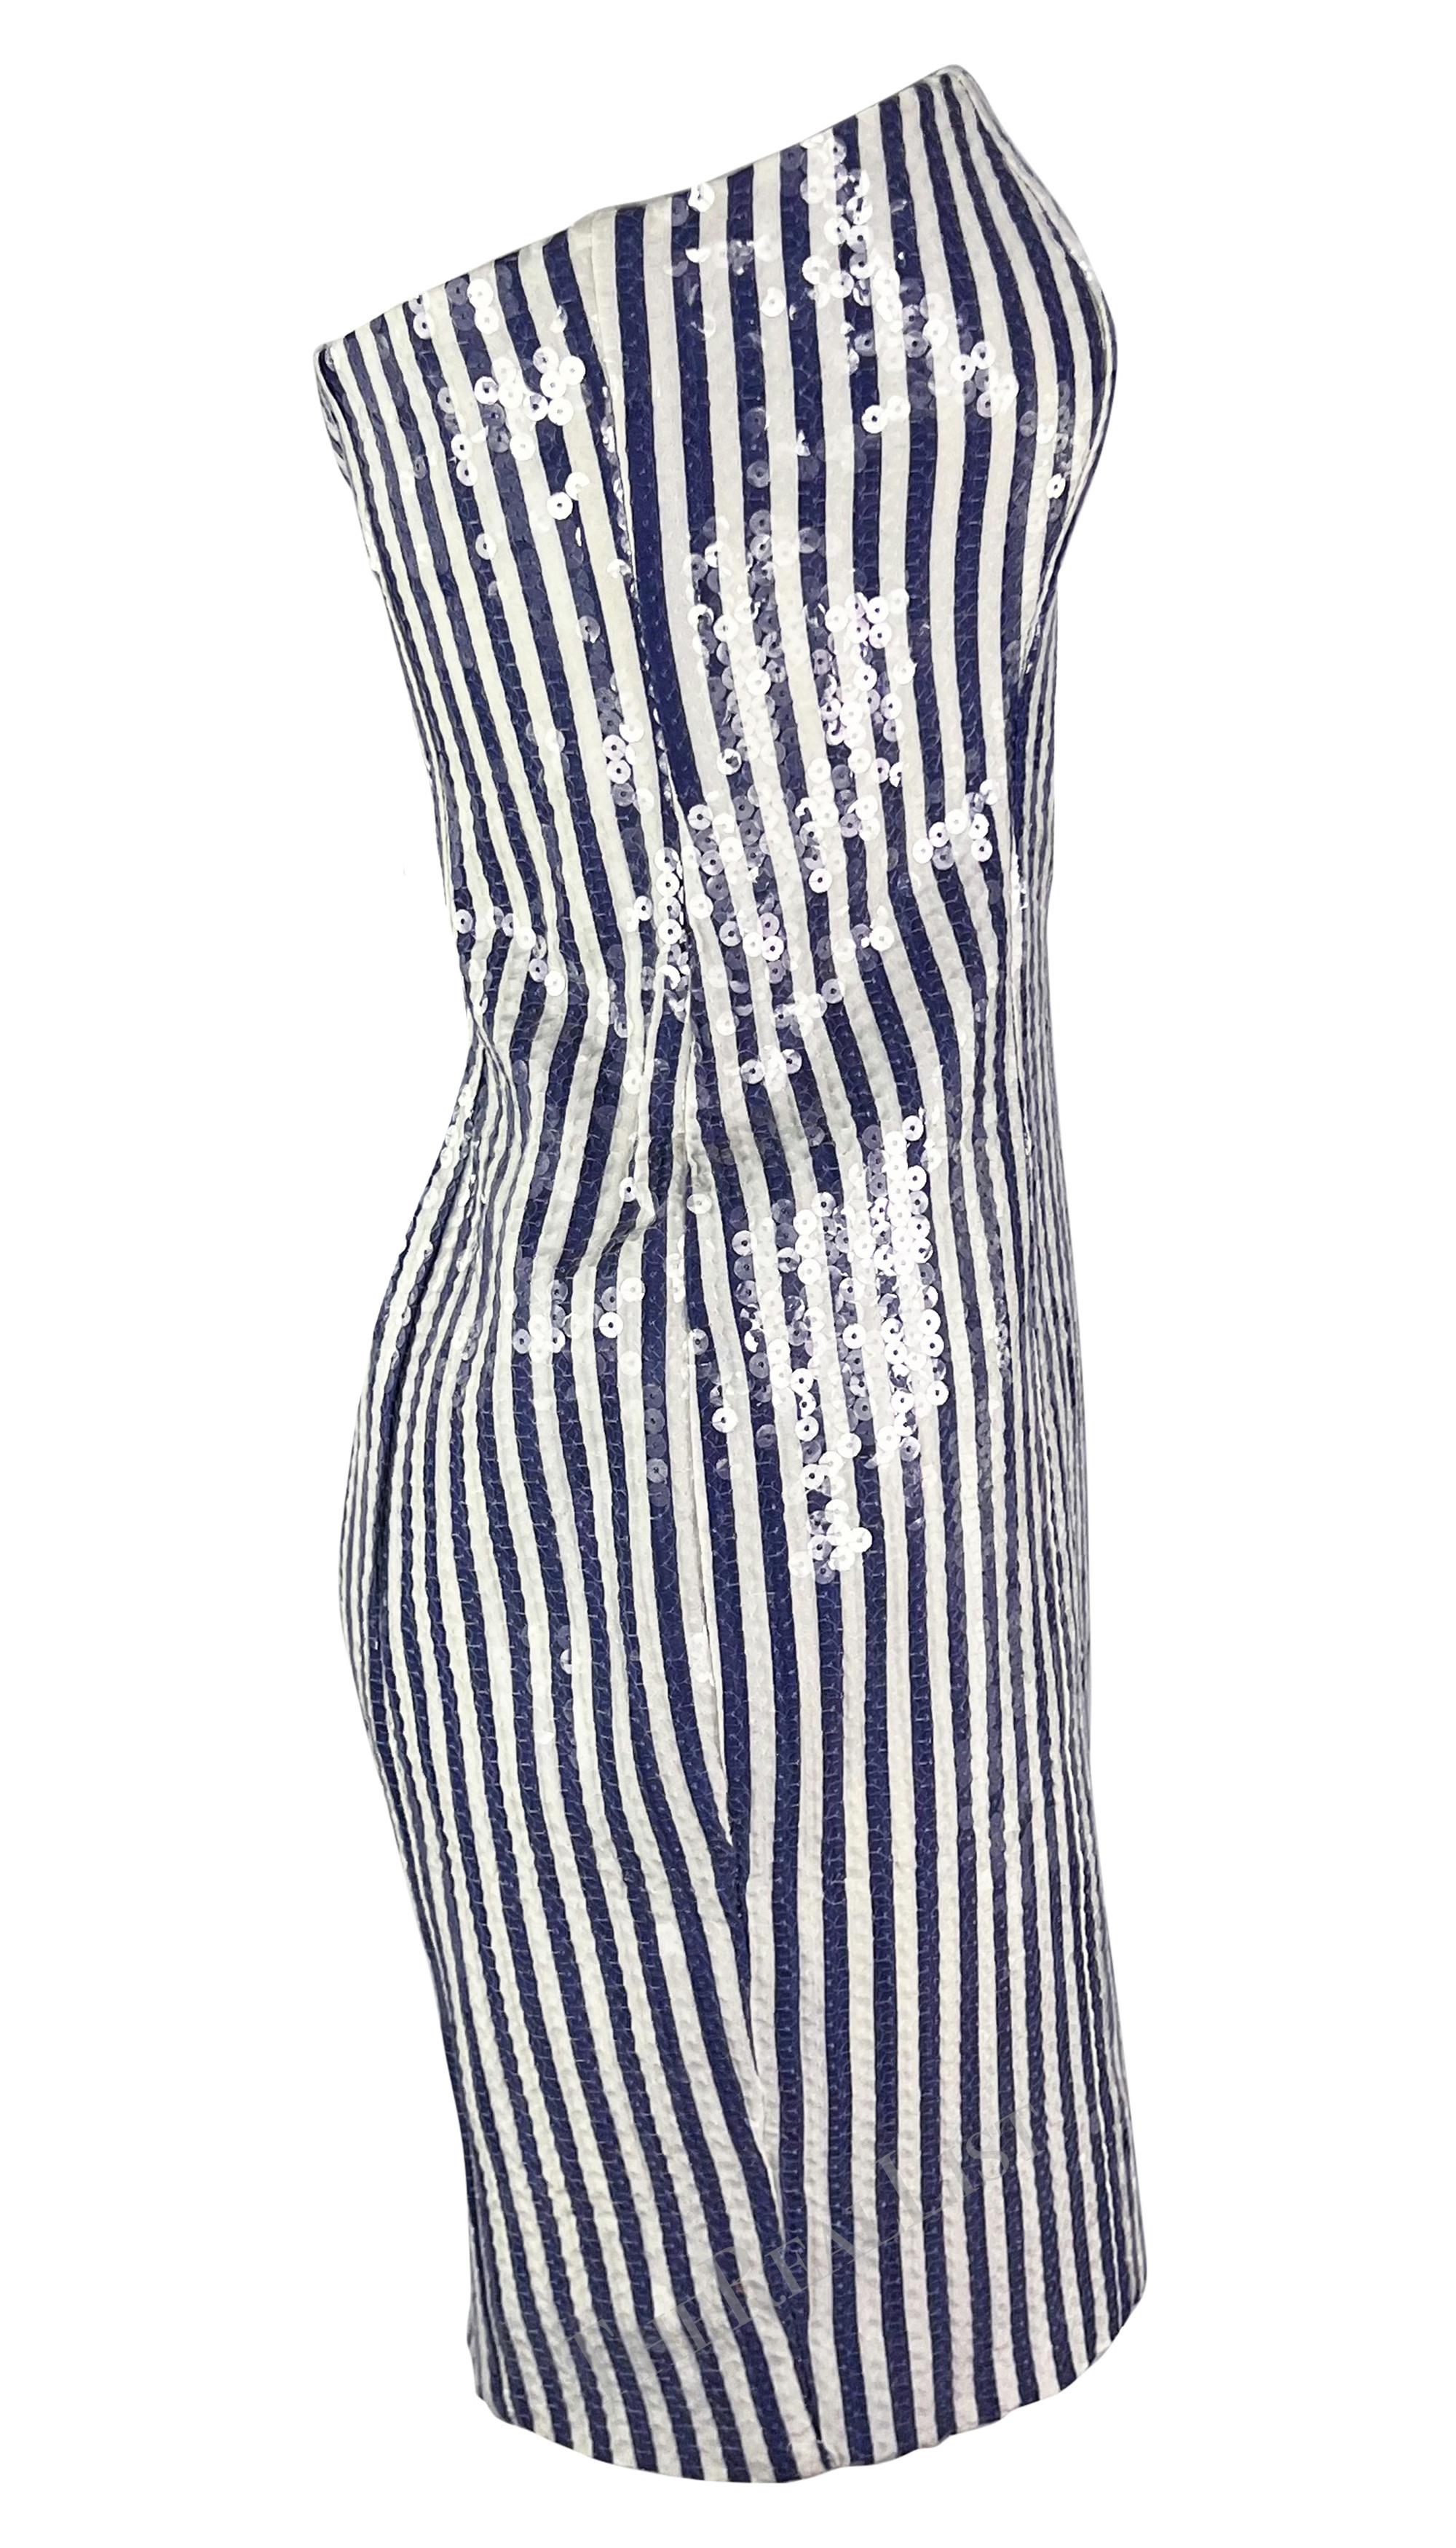 S/S 1990 Michael Kors Runway Blue White Sequin Striped Strapless Mini Dress In Excellent Condition For Sale In West Hollywood, CA